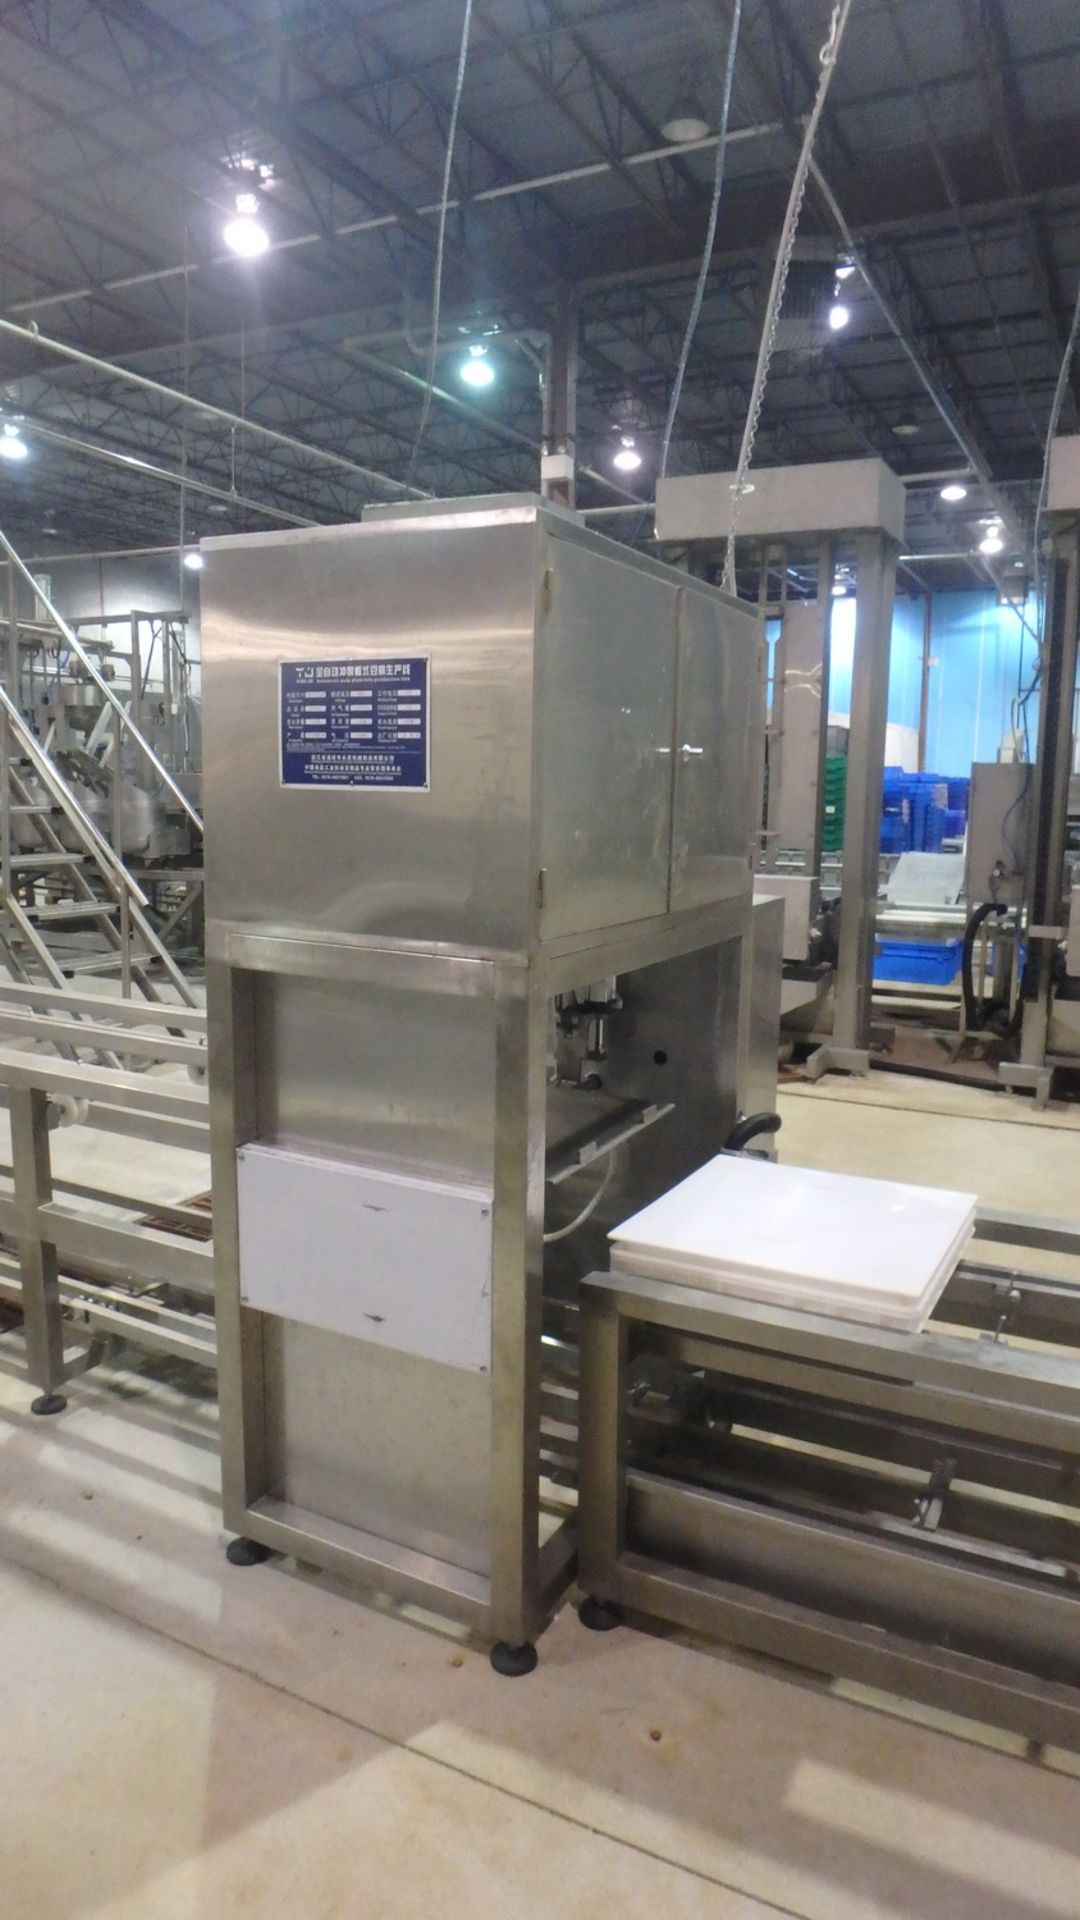 2018 YONG JIN AUTOMATIC PULP PLATE TOFU PRODUCTION LINE W/ TRAY CONVEYOR, DEPOSITOR, & STAINLESS - Image 3 of 5